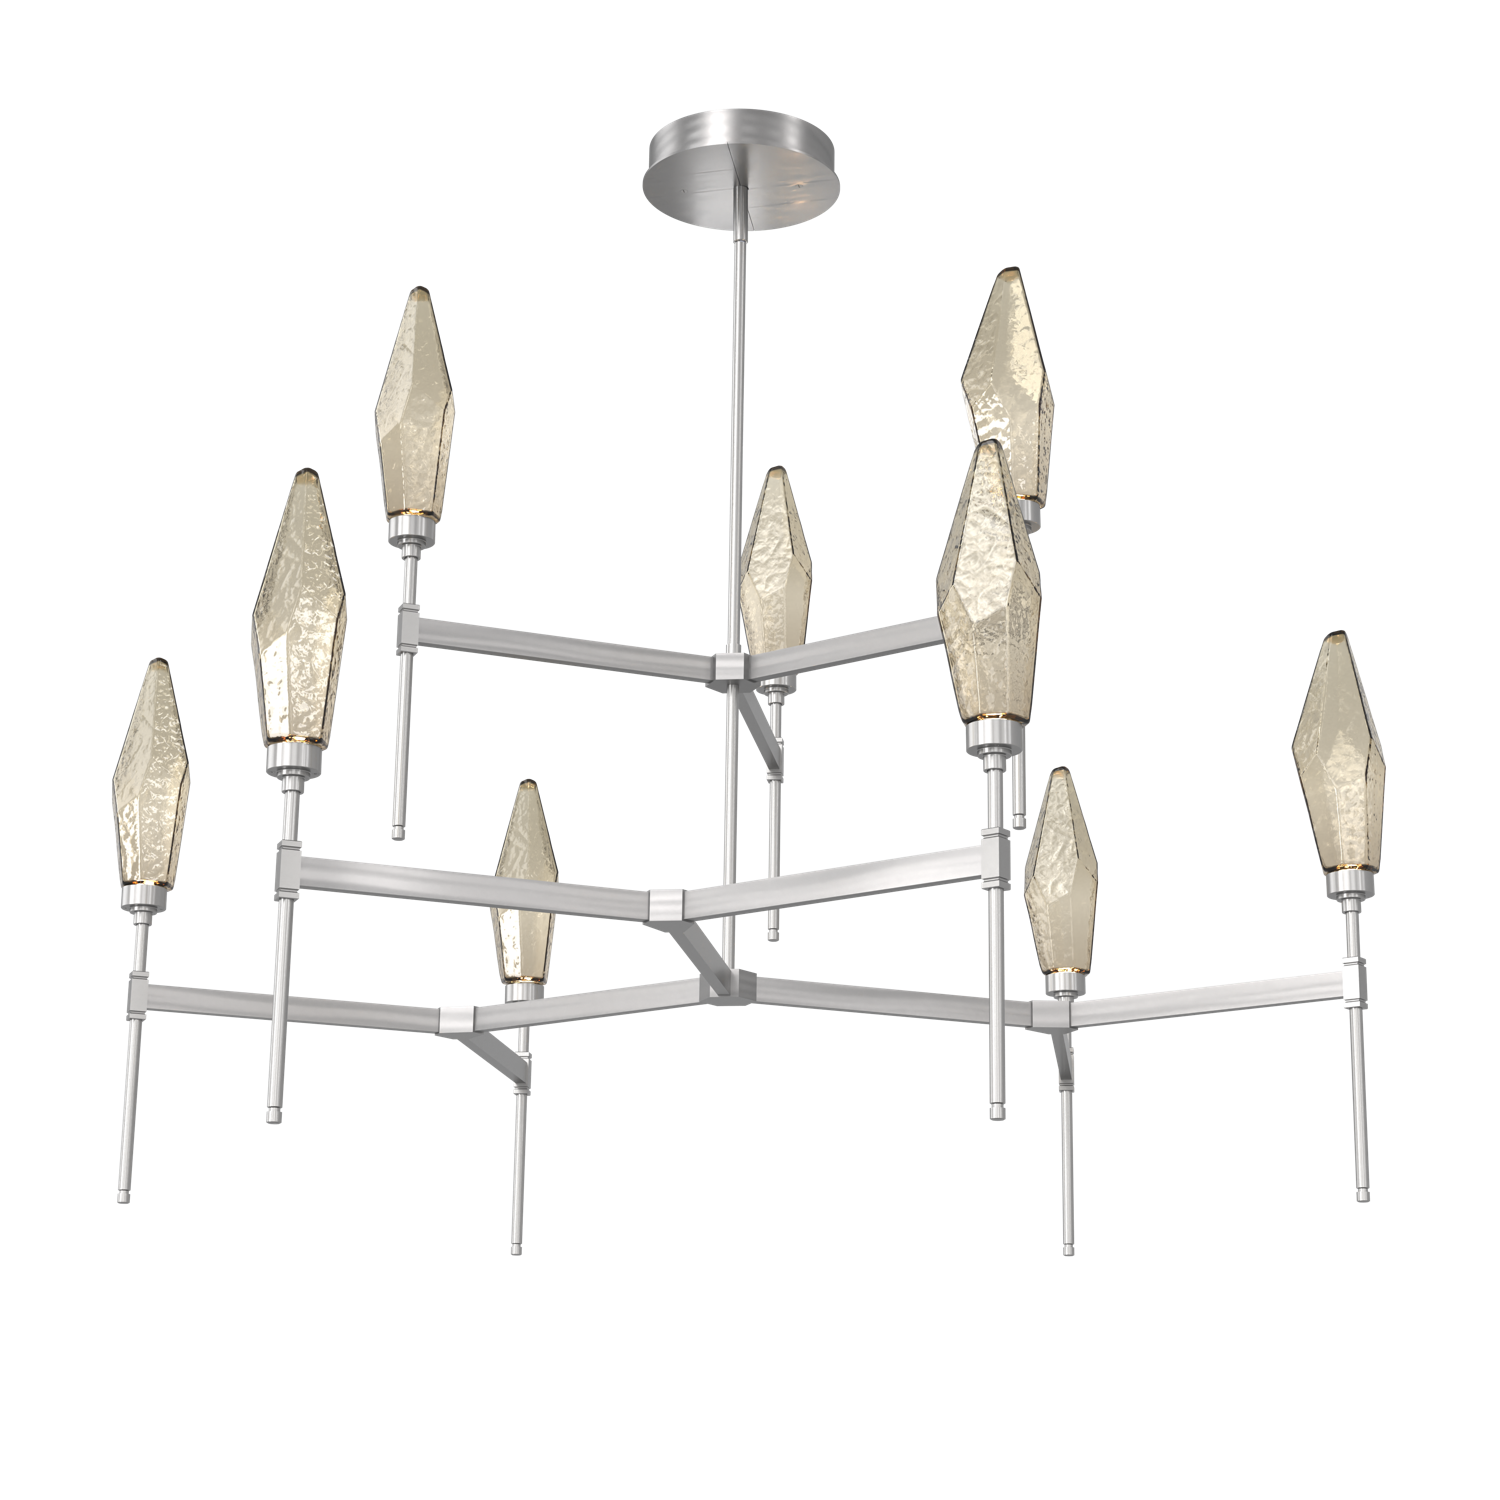 CHB0050-54-SN-CB-Hammerton-Studio-Rock-Crystal-54-inch-round-two-tier-belvedere-chandelier-with-satin-nickel-finish-and-chilled-bronze-blown-glass-shades-and-LED-lamping